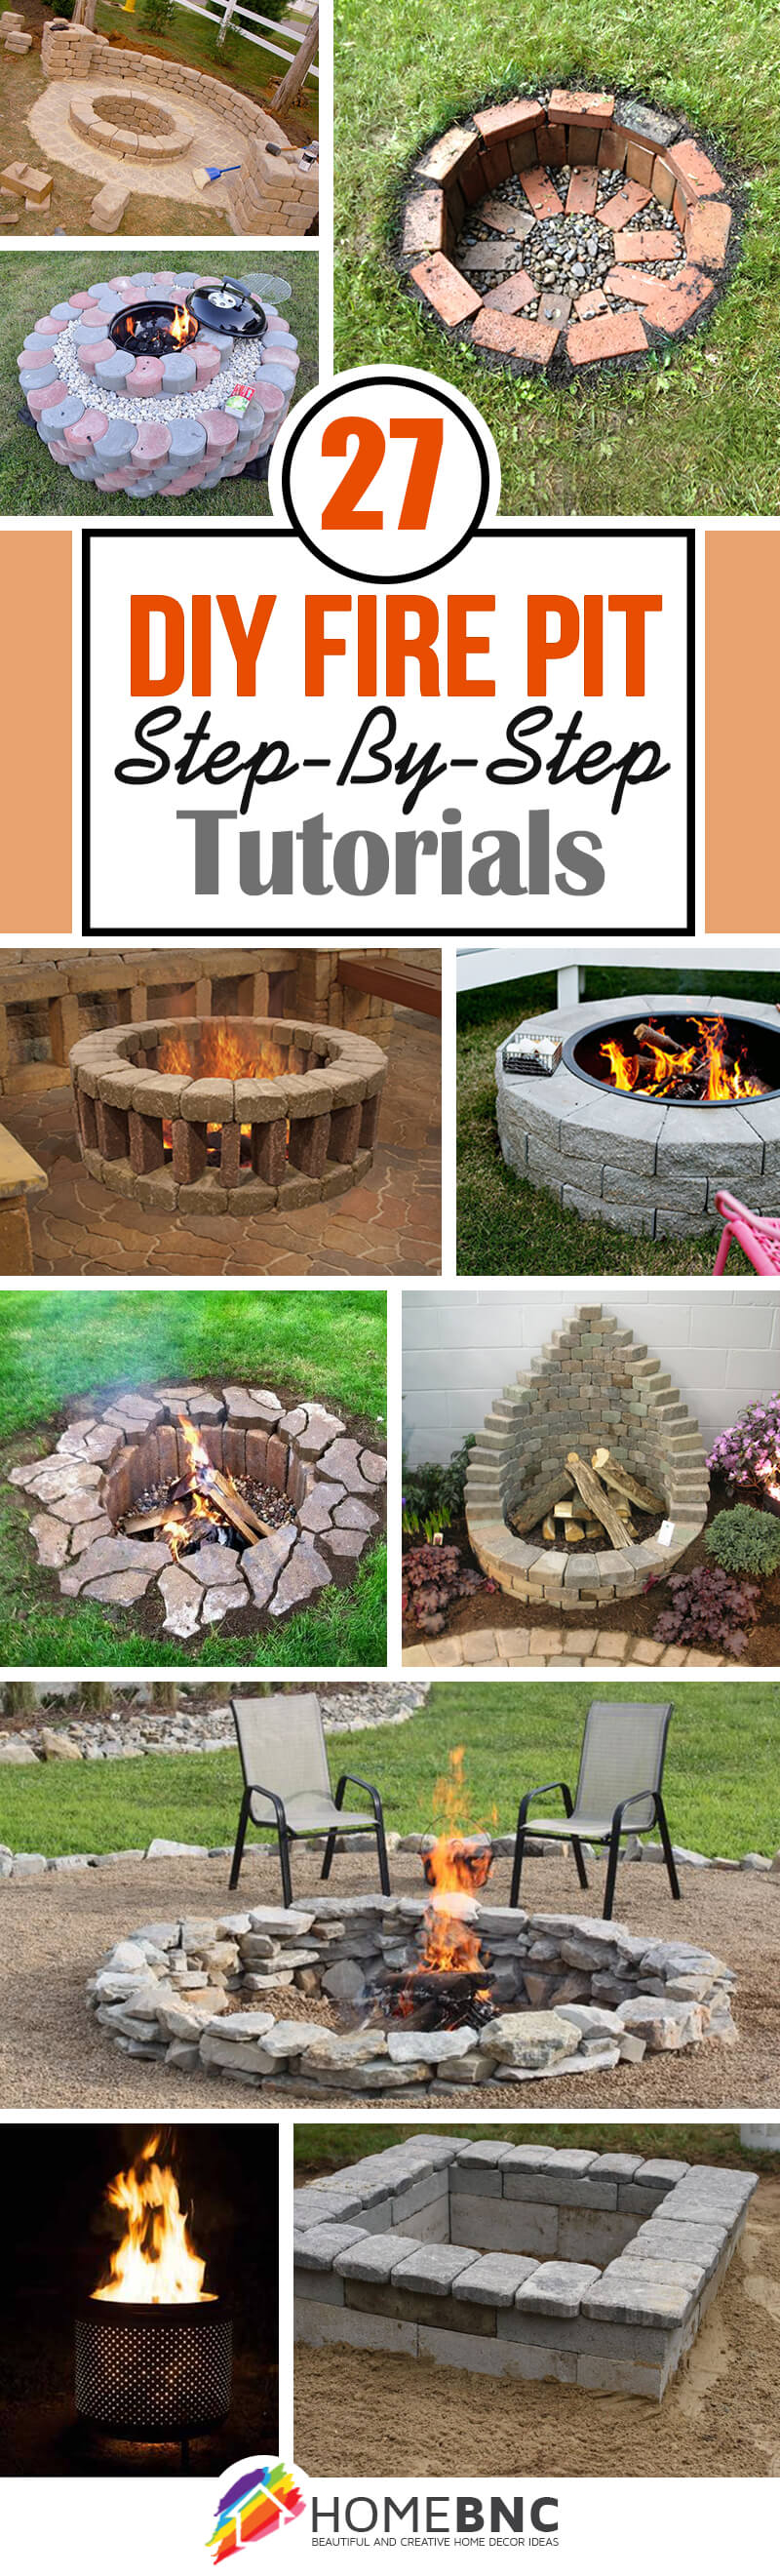 27 Best Diy Firepit Ideas And Designs, How To Build A Cool Fire Pit